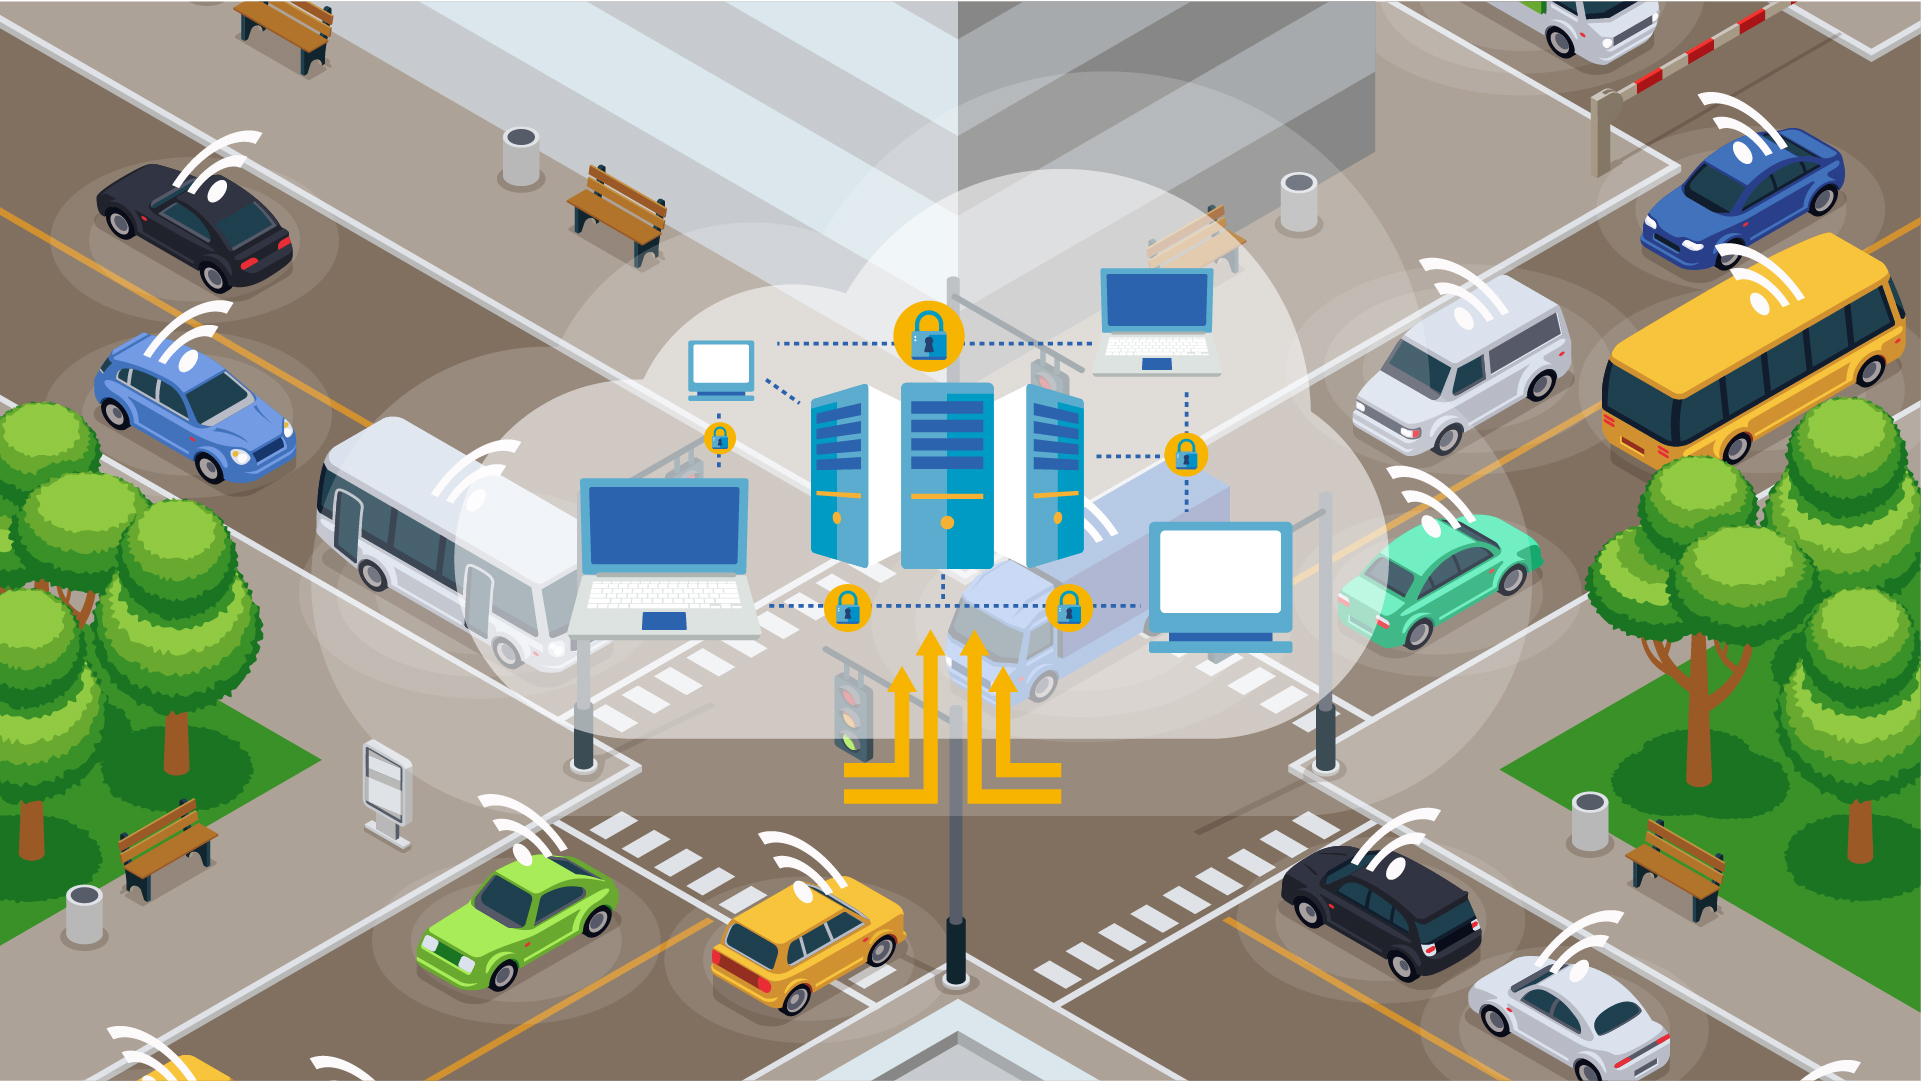 Researchers make progress in field of privacy computing-empowered intelligent transportation system